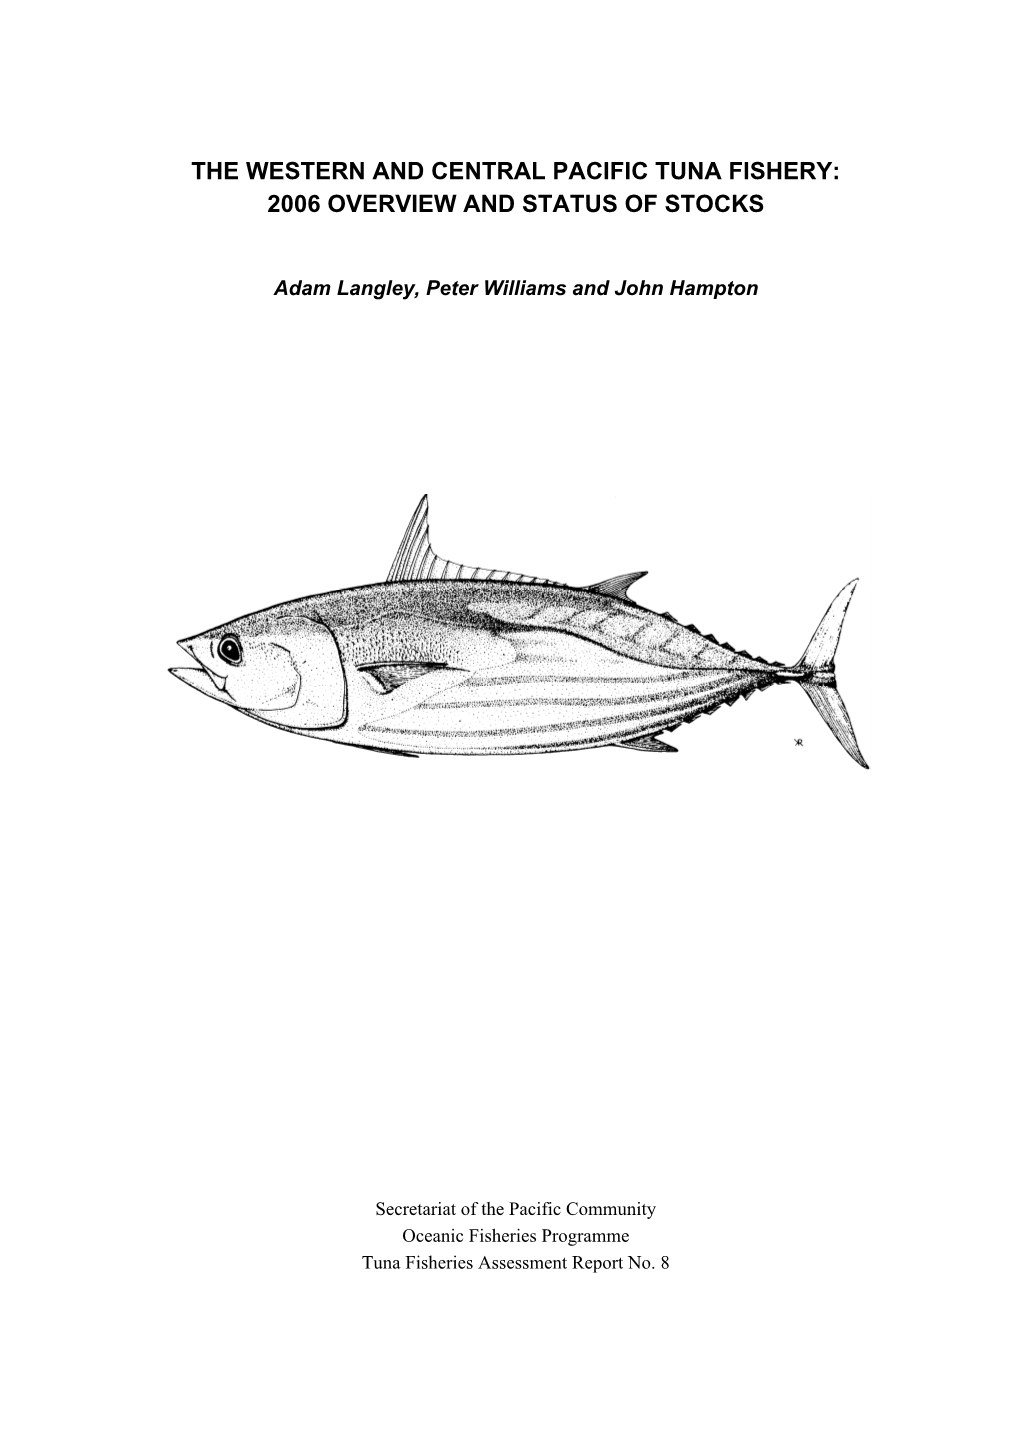 The Western and Central Pacific Tuna Fishery: 2006 Overview and Status of Stocks